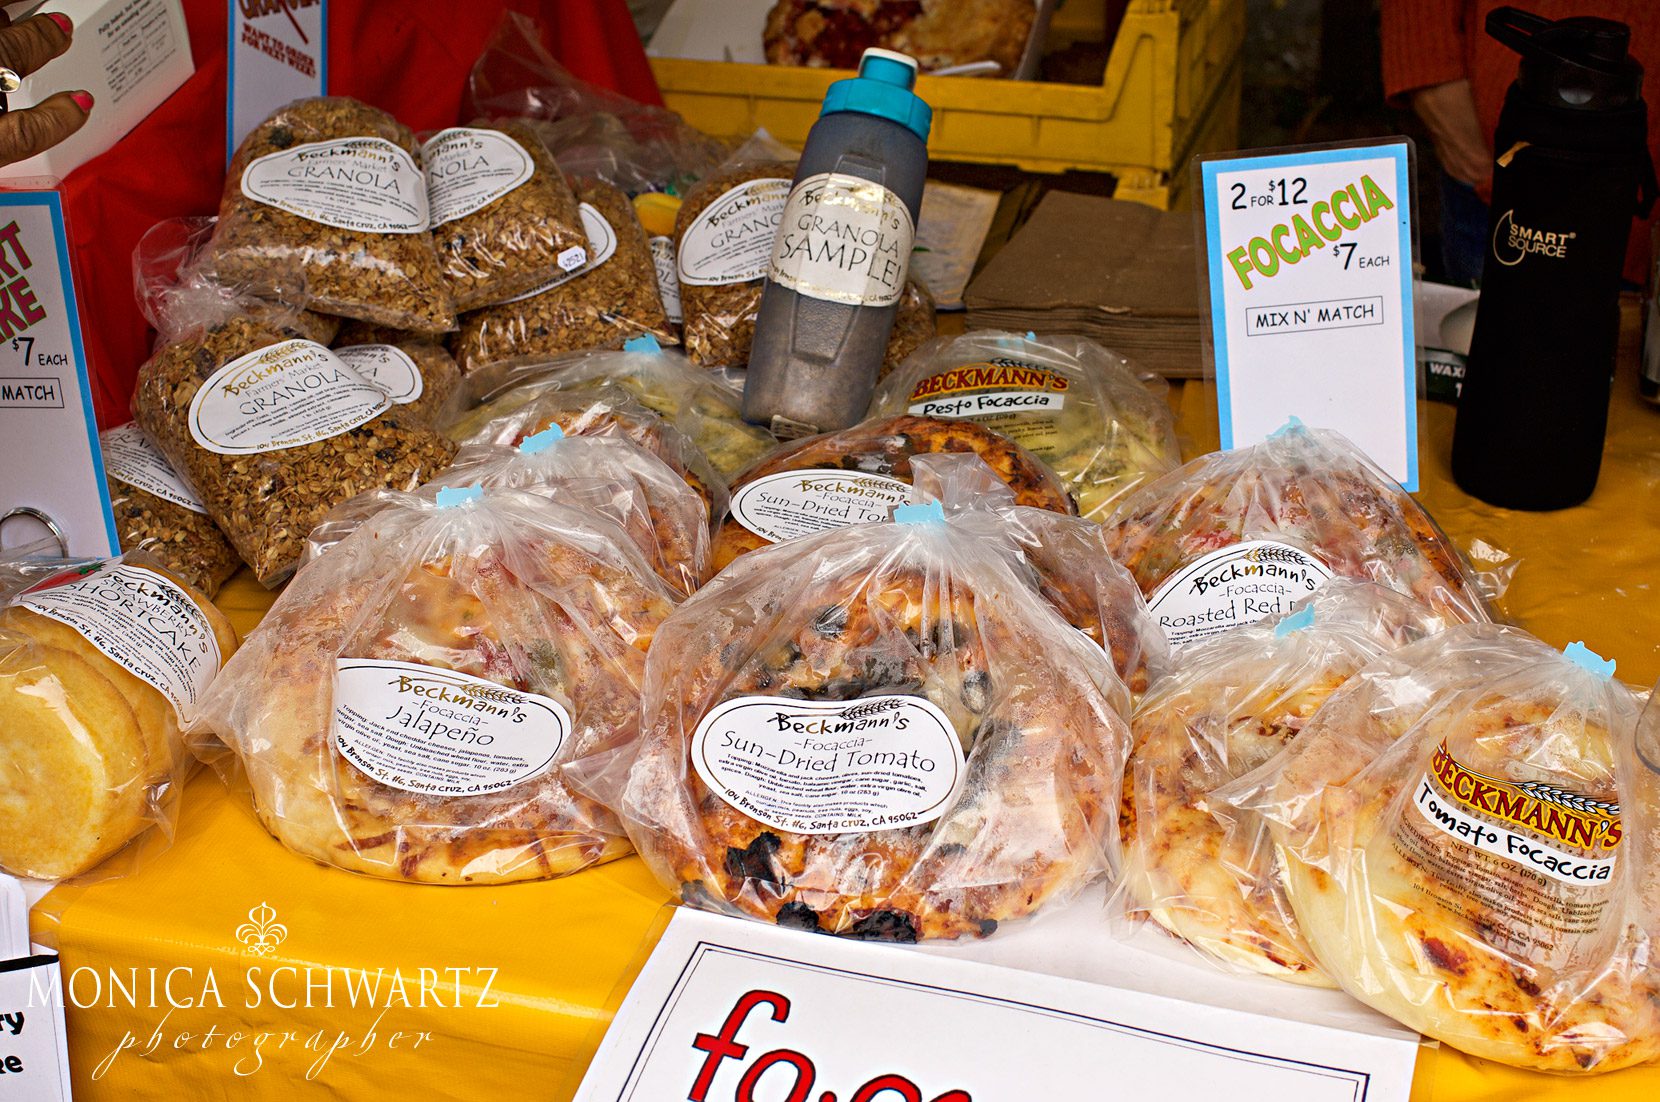 Assorted-focaccias-at-Beckmanns-Bakery-at-the-farmers-market-in-Carmel-by-the-Sea-California